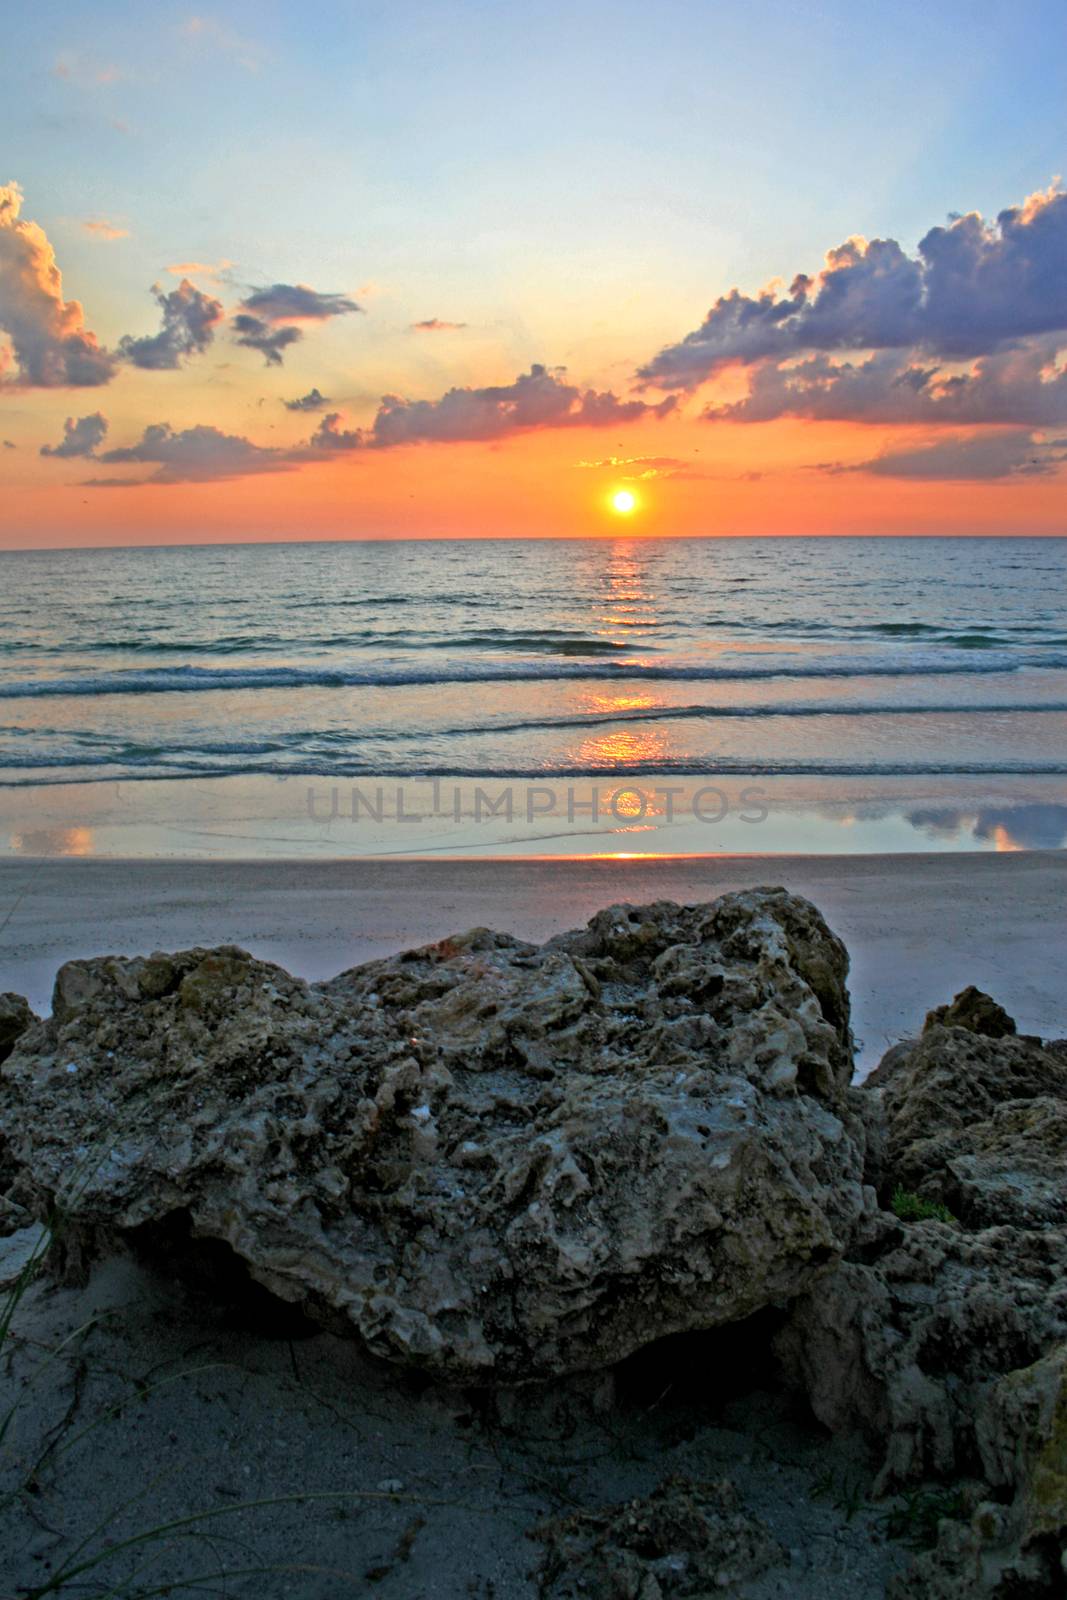 A sunset over the ocean with rocks